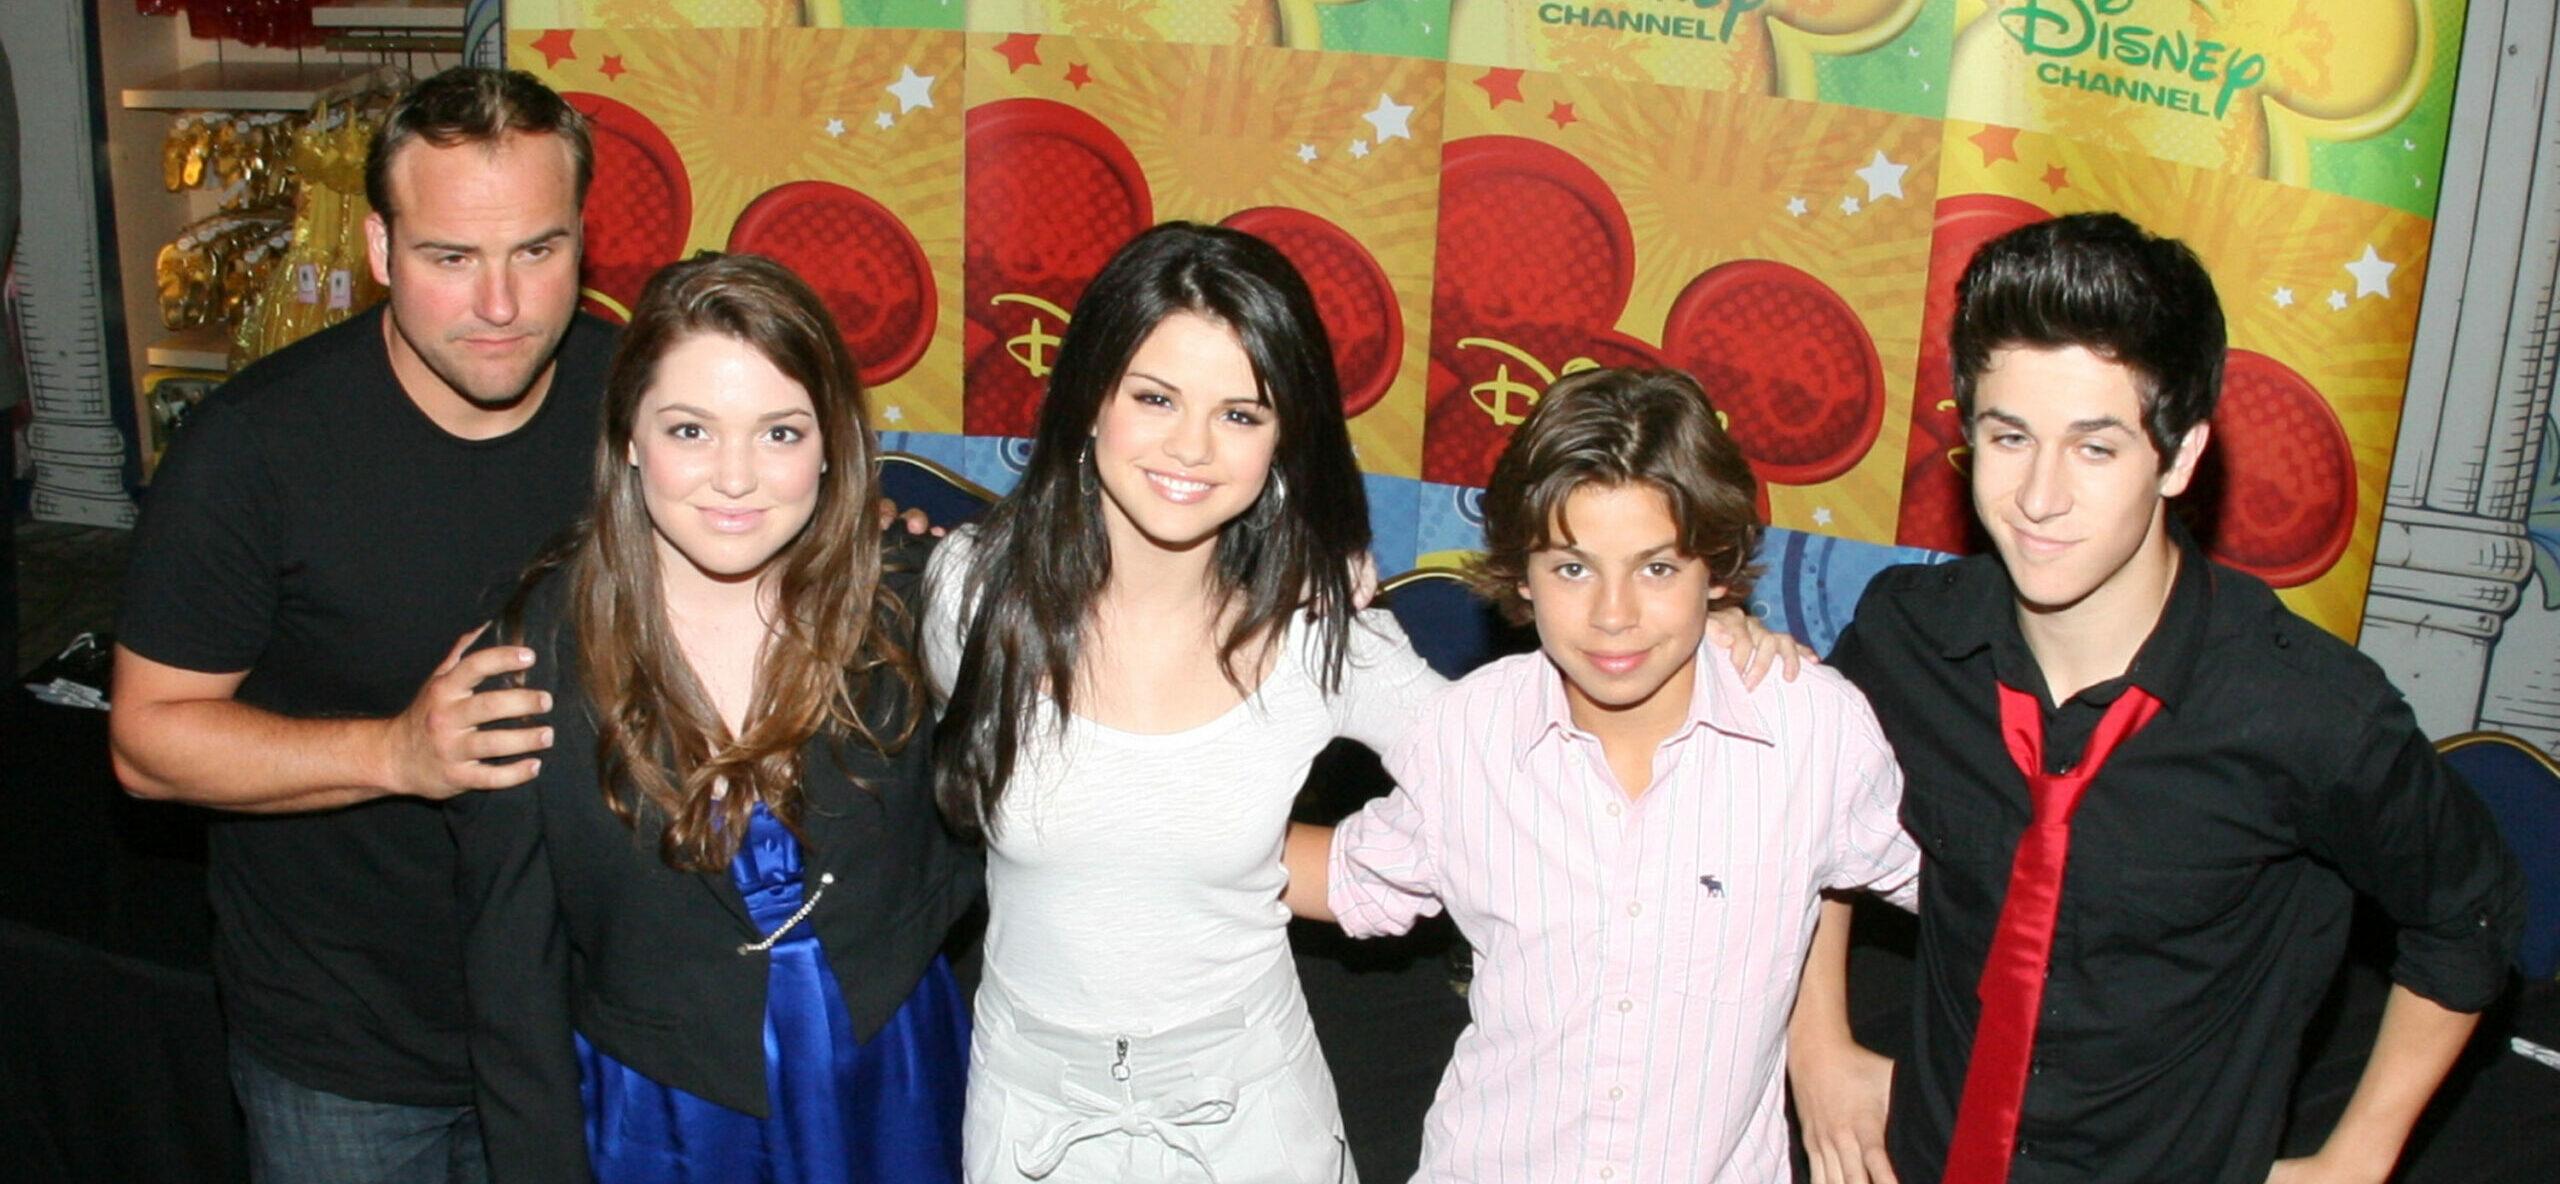 ‘Wizards of Waverly Place’ Cast Reunite, Perform Viral Dance